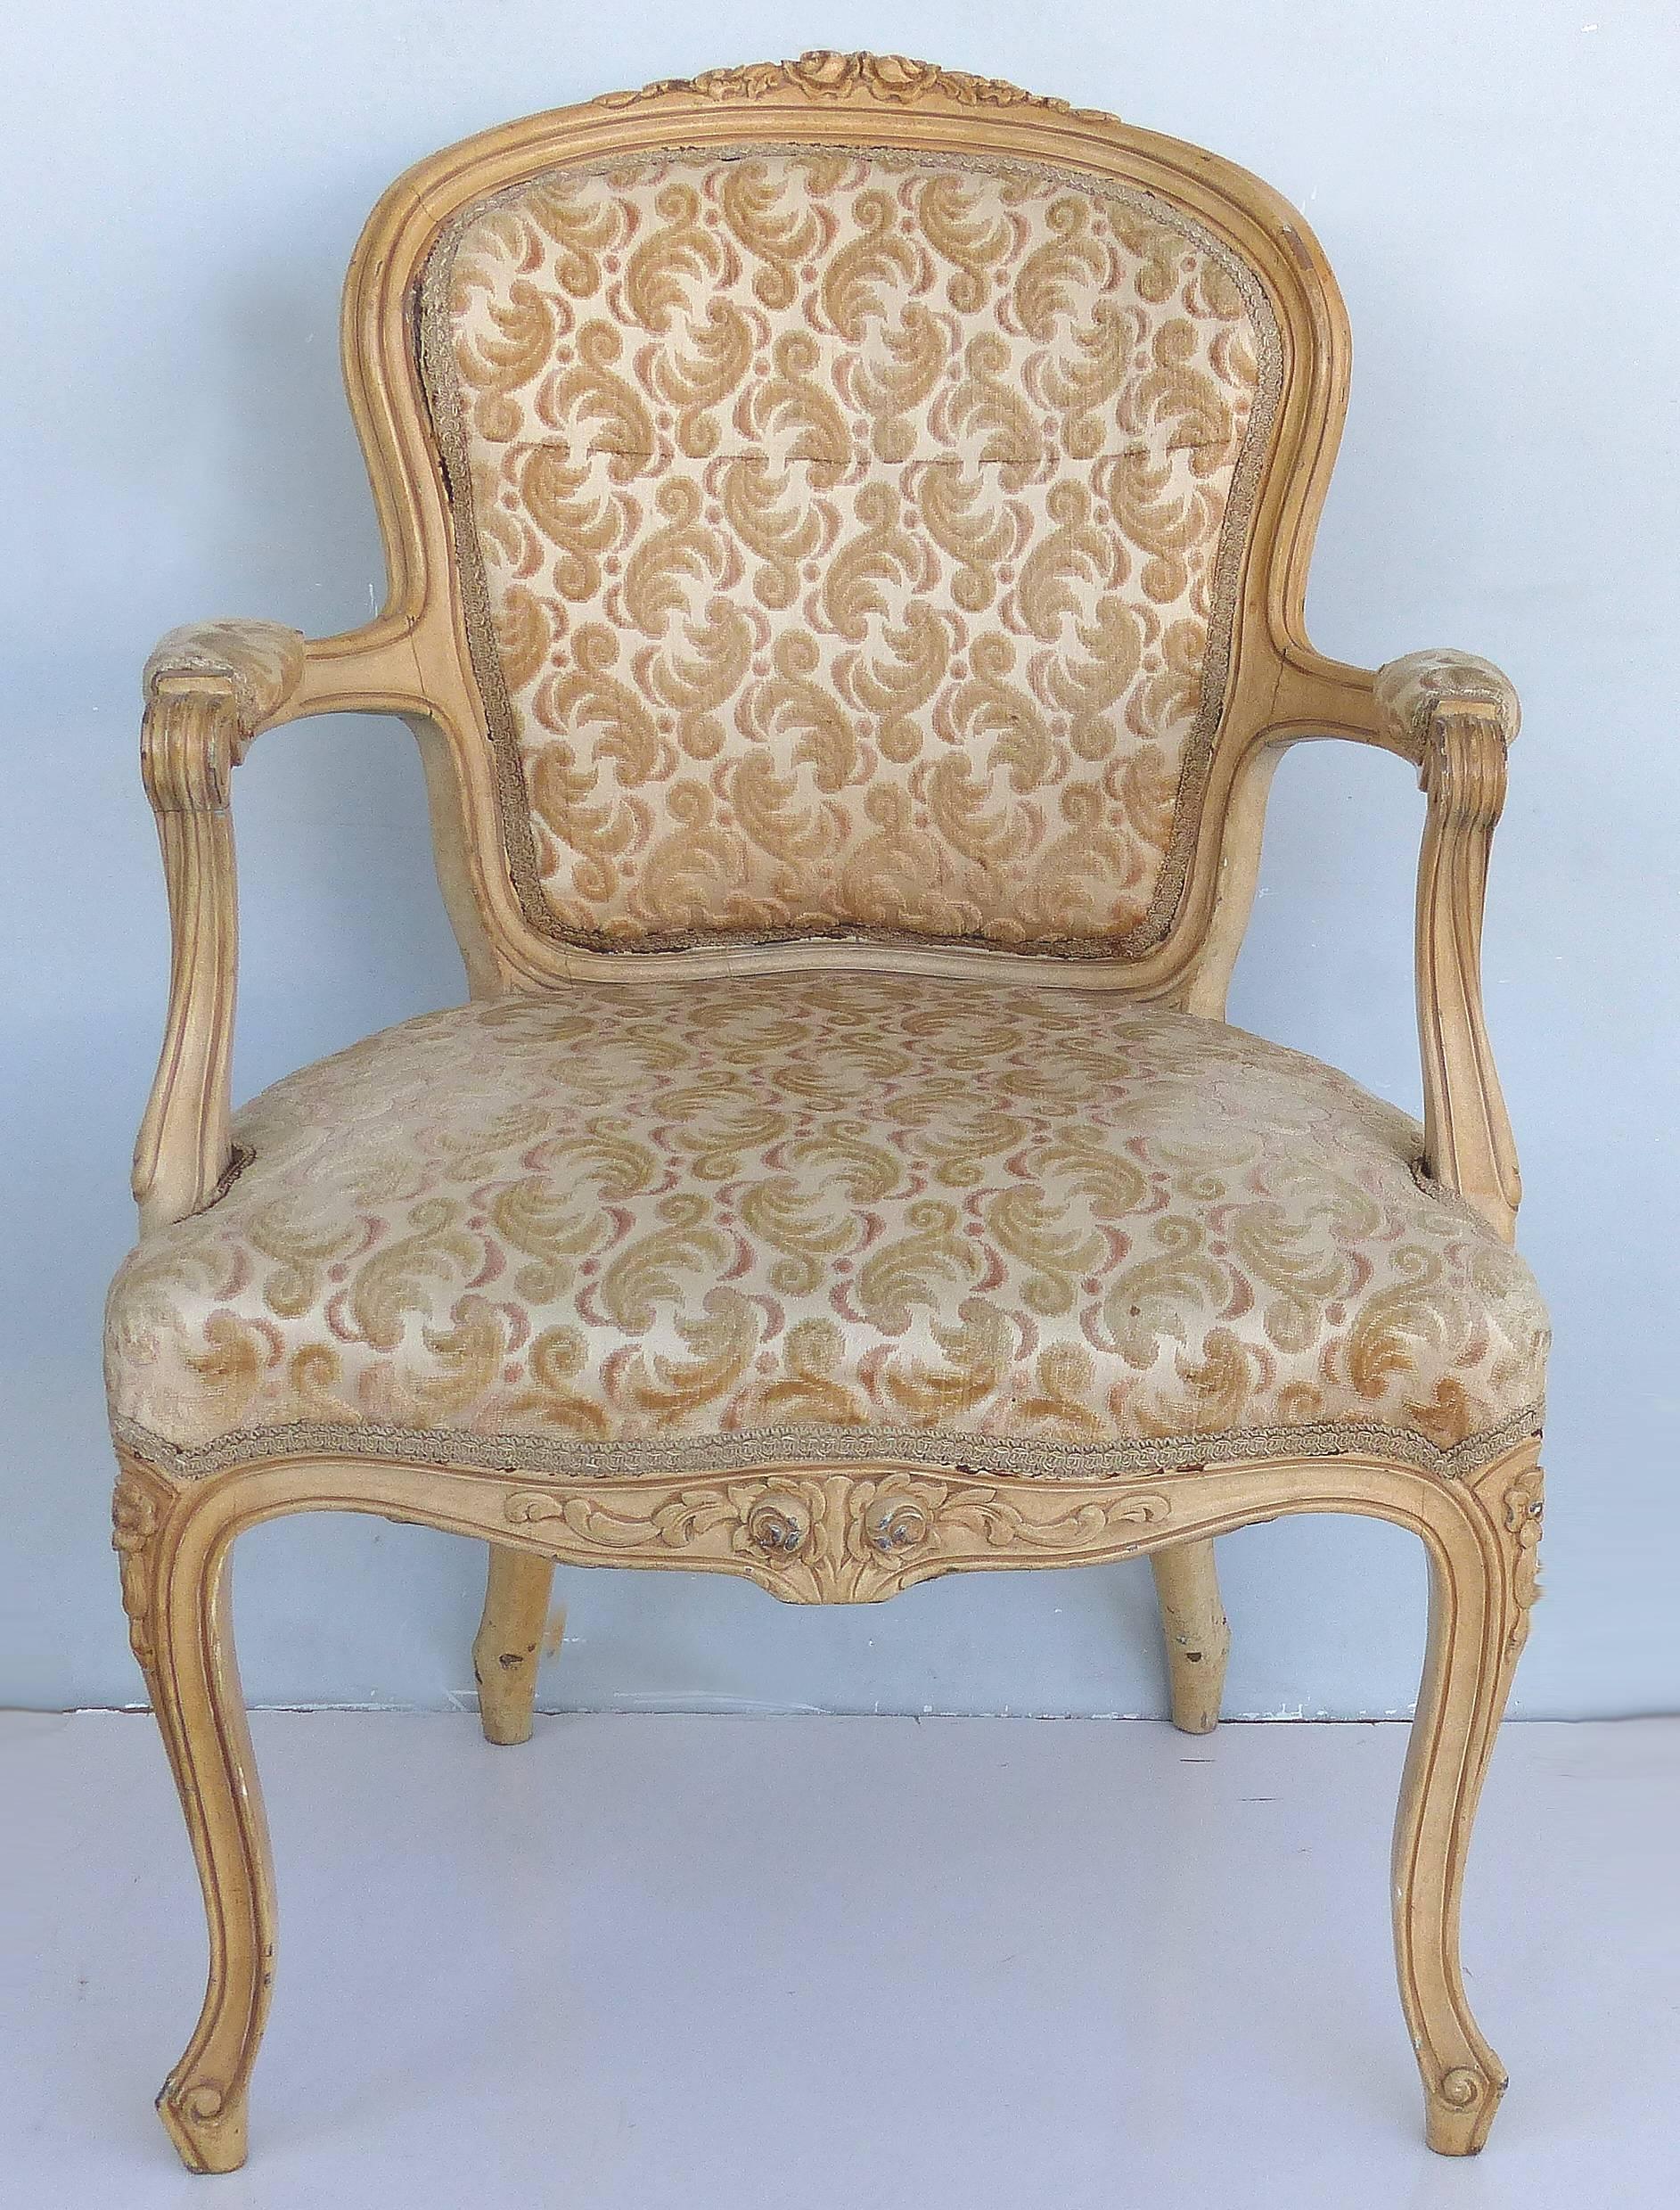 Louis XV Style Provincial Fauteuil Armchairs with Velvet Upholstery, Pair

Offered for sale are a late 19th-early 20th century pair of Louis XV style French provincial fauteuil armchairs. Both chairs show signs of age.
Measure: Seat, 17